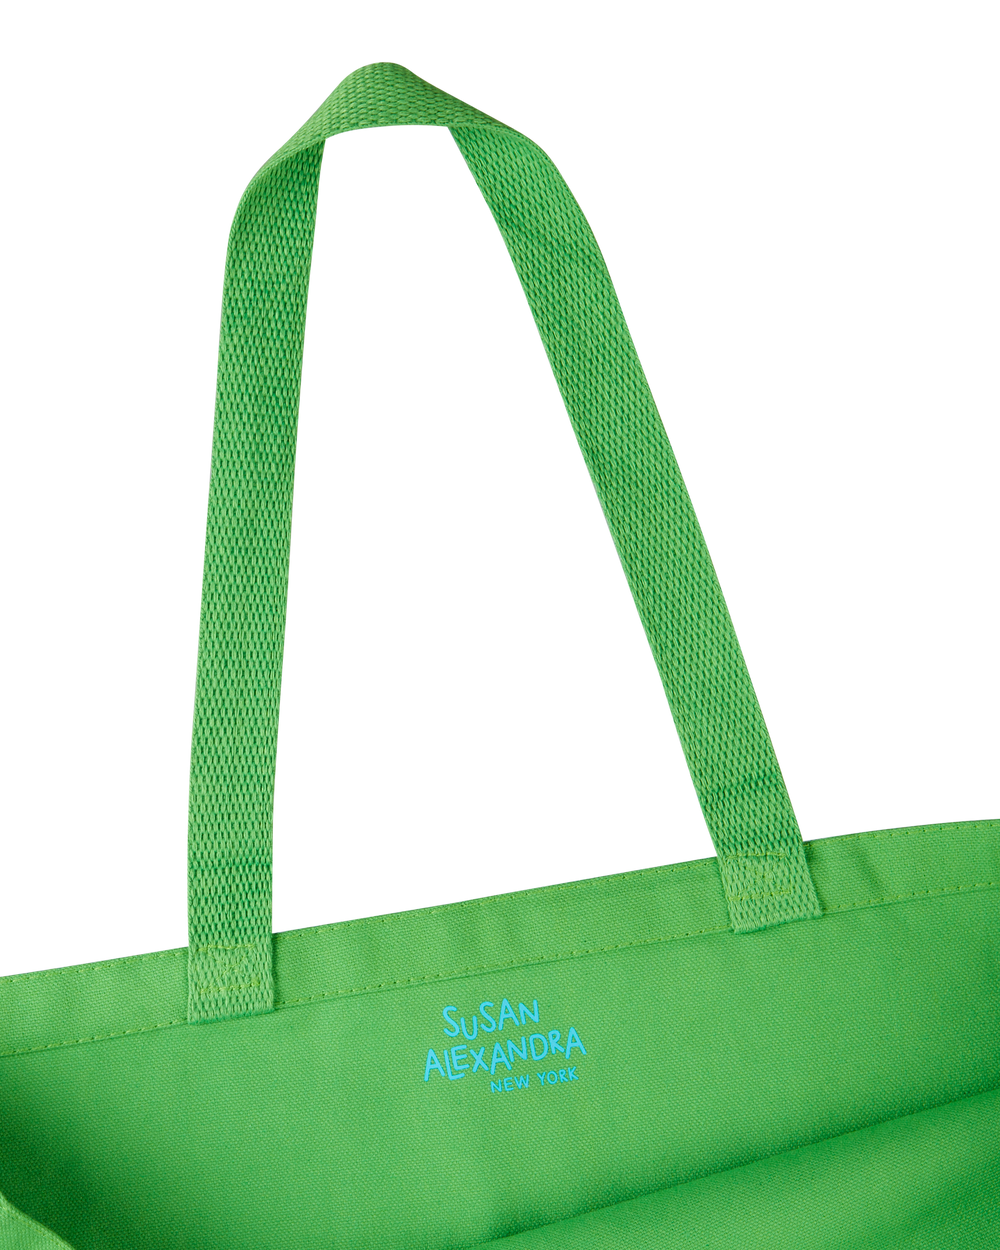 For Schlepping Tote Bag